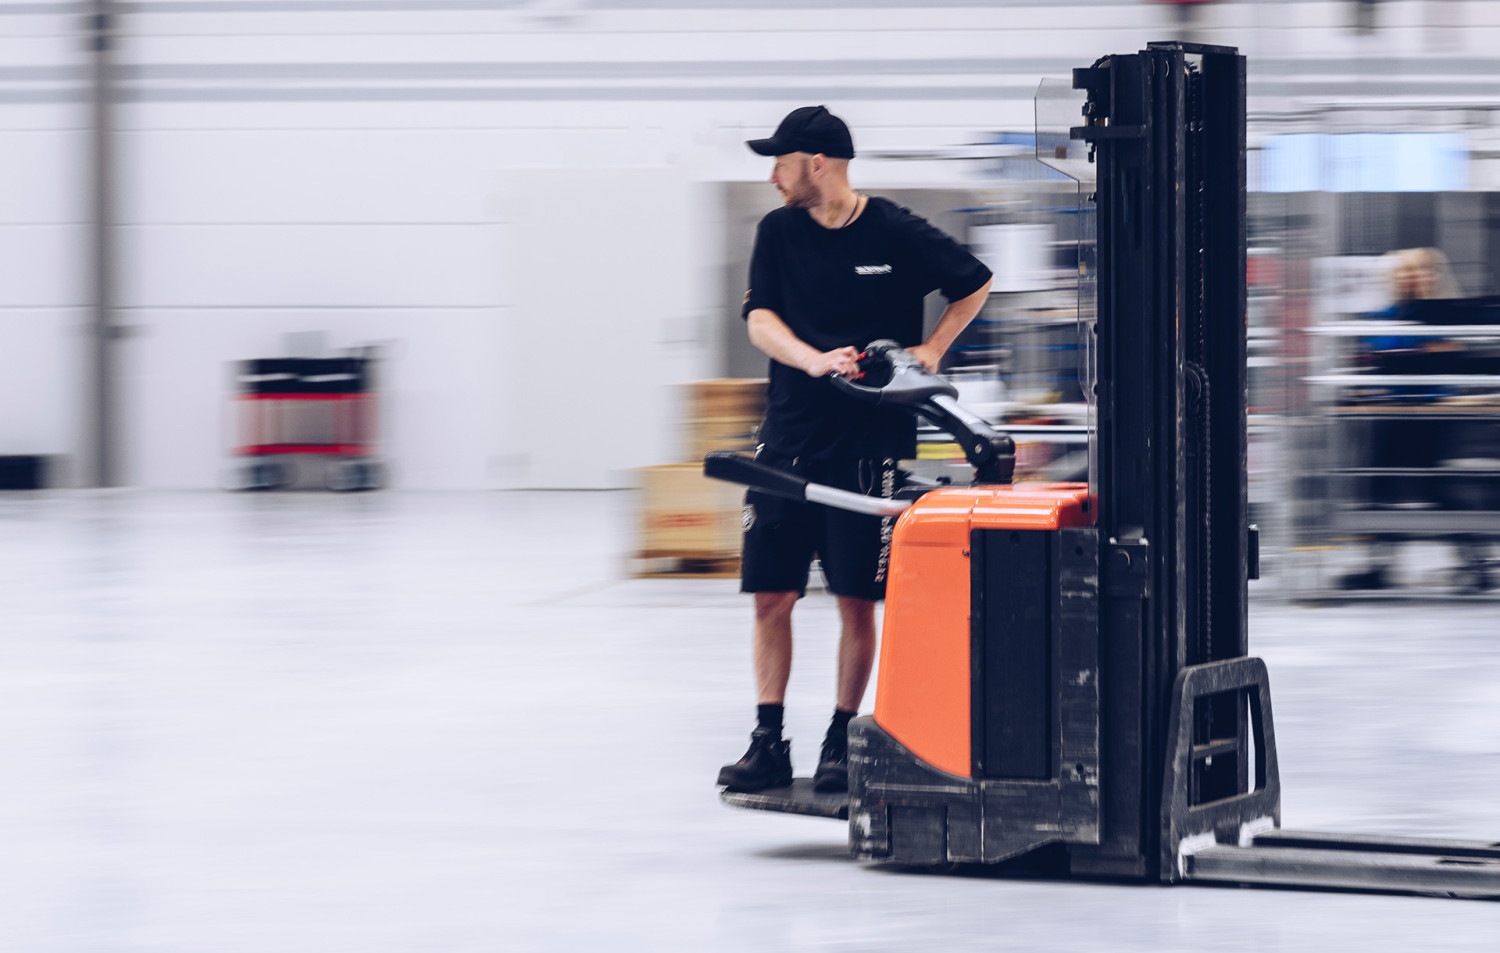 An employee at Micropower drives a forklift